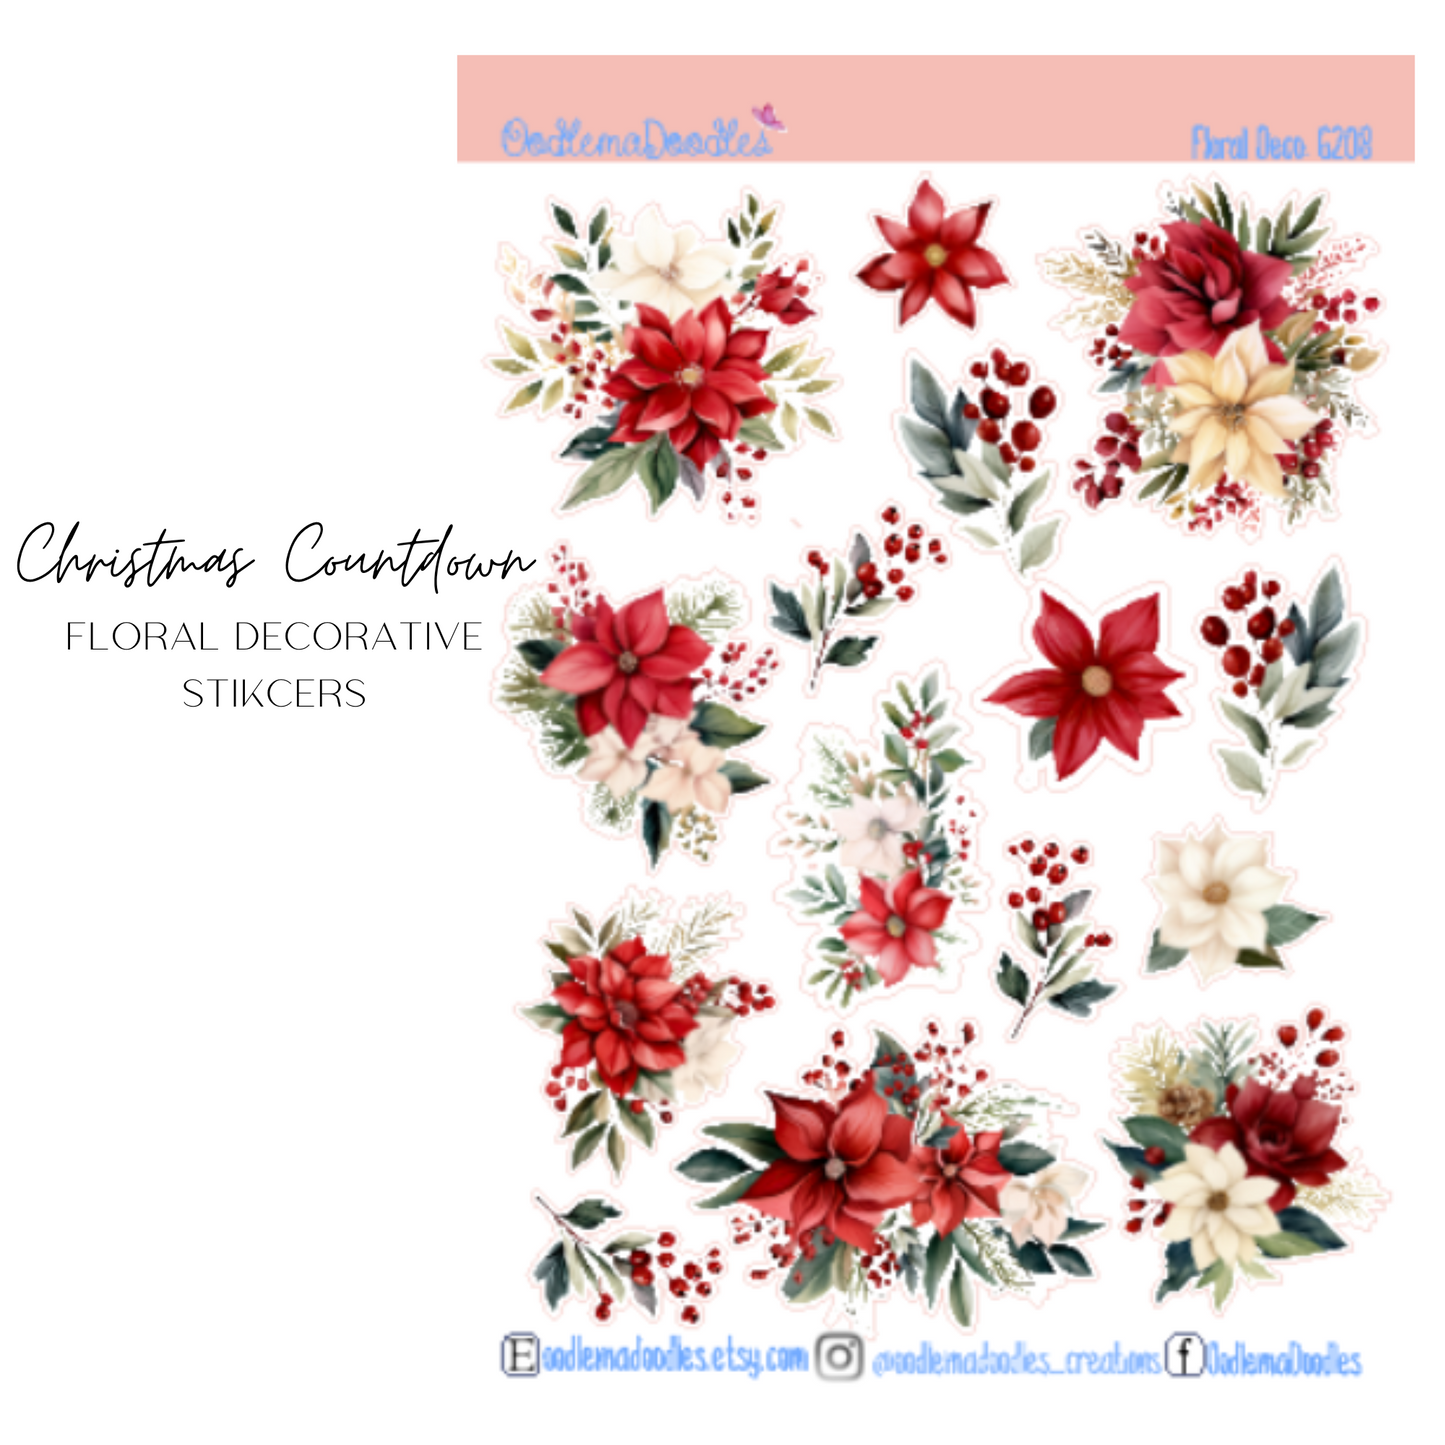 Christmas Countdown Floral Decorative Stickers